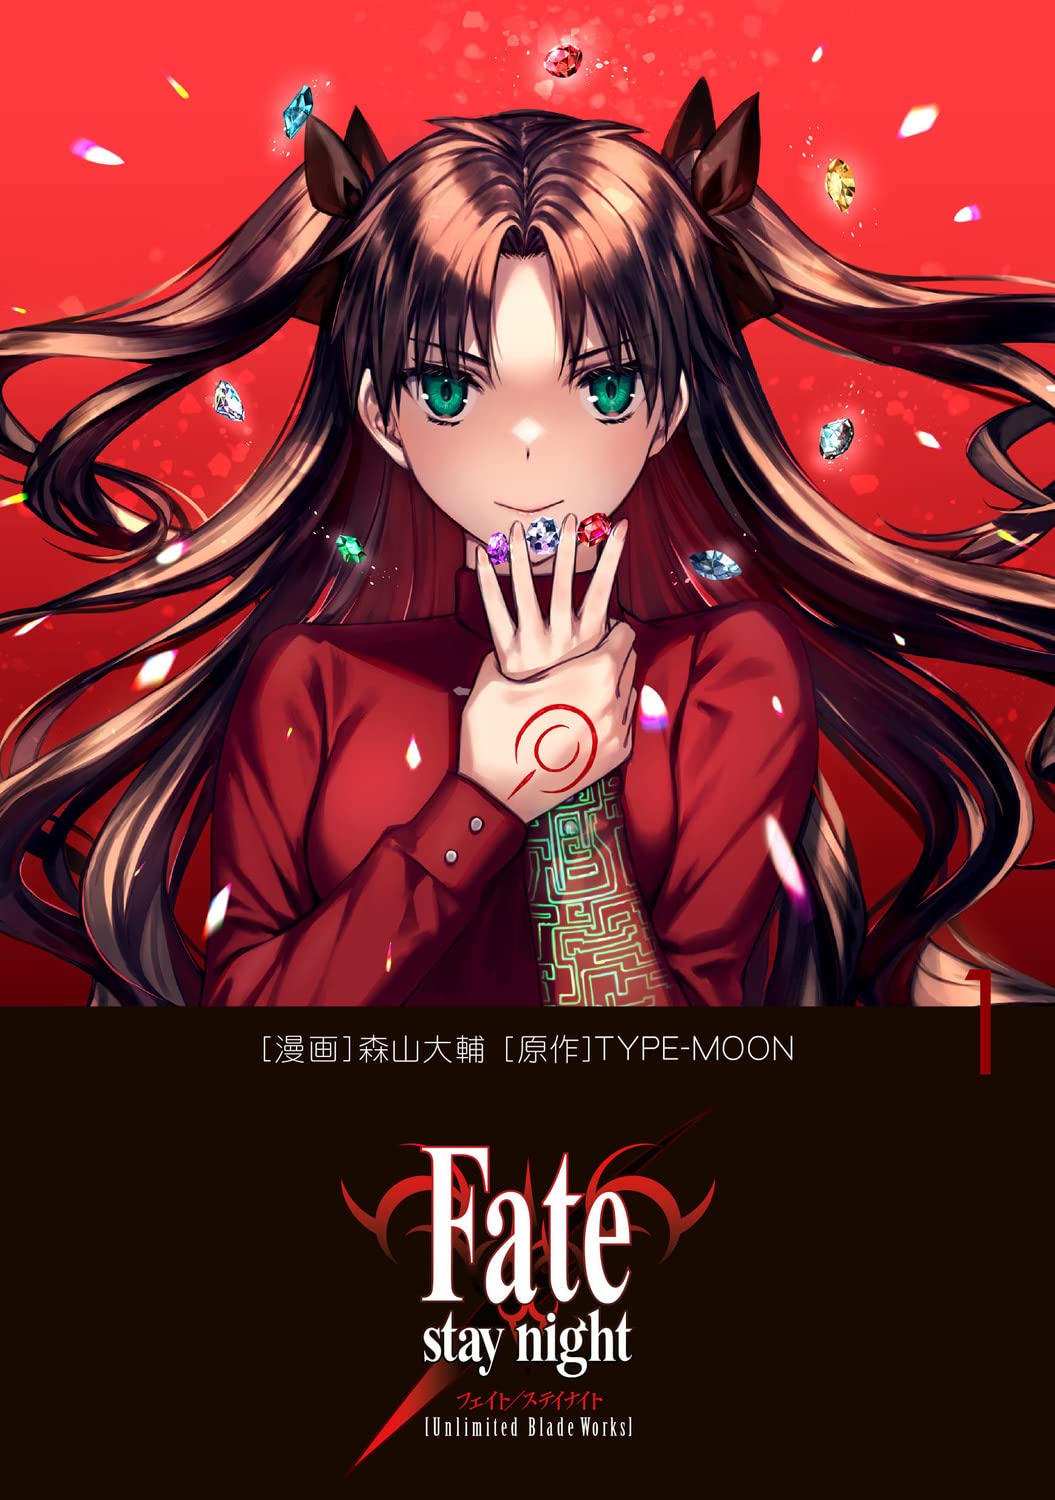 Fate/stay night: Unlimited Blade Works (manga) | TYPE-MOON Wiki